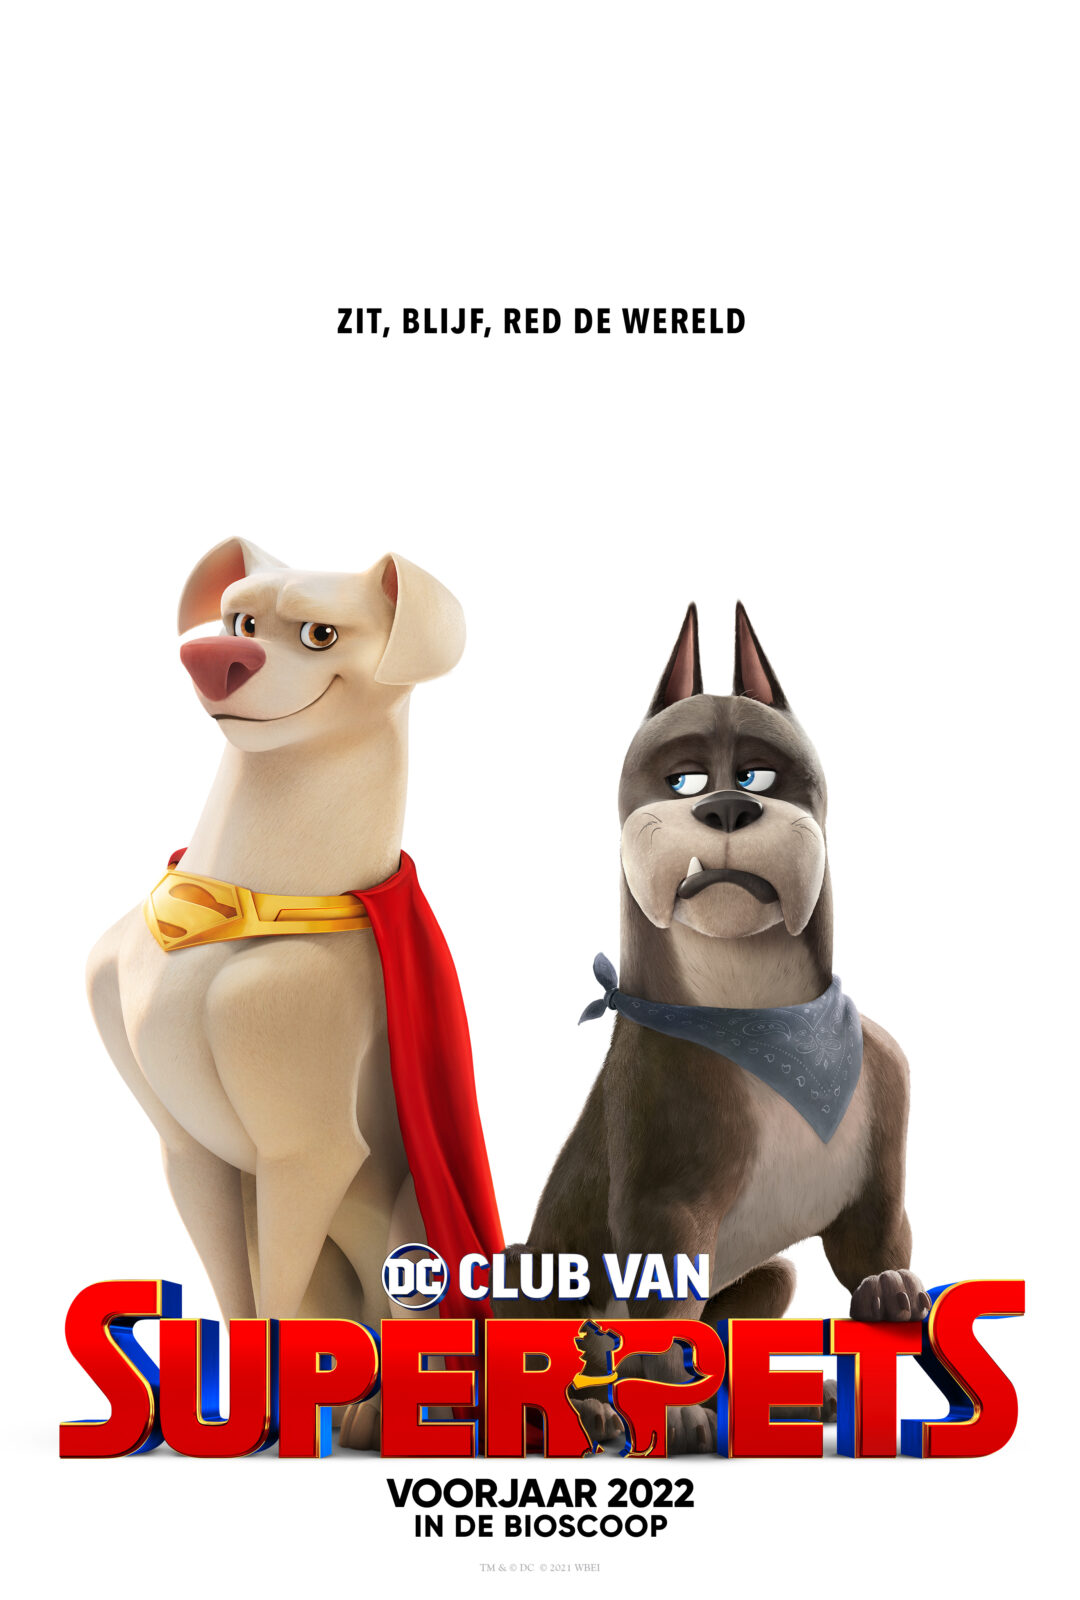 DC-Club-van-Super-Pets-NL-_ps_1_jpg_sd-high_Copyright-2022-Warner-Bros-Entertainment-Inc-All-Rights-Reserved-Photo-Credit-Courtesy-Warner-Bros-Pictures.jpg